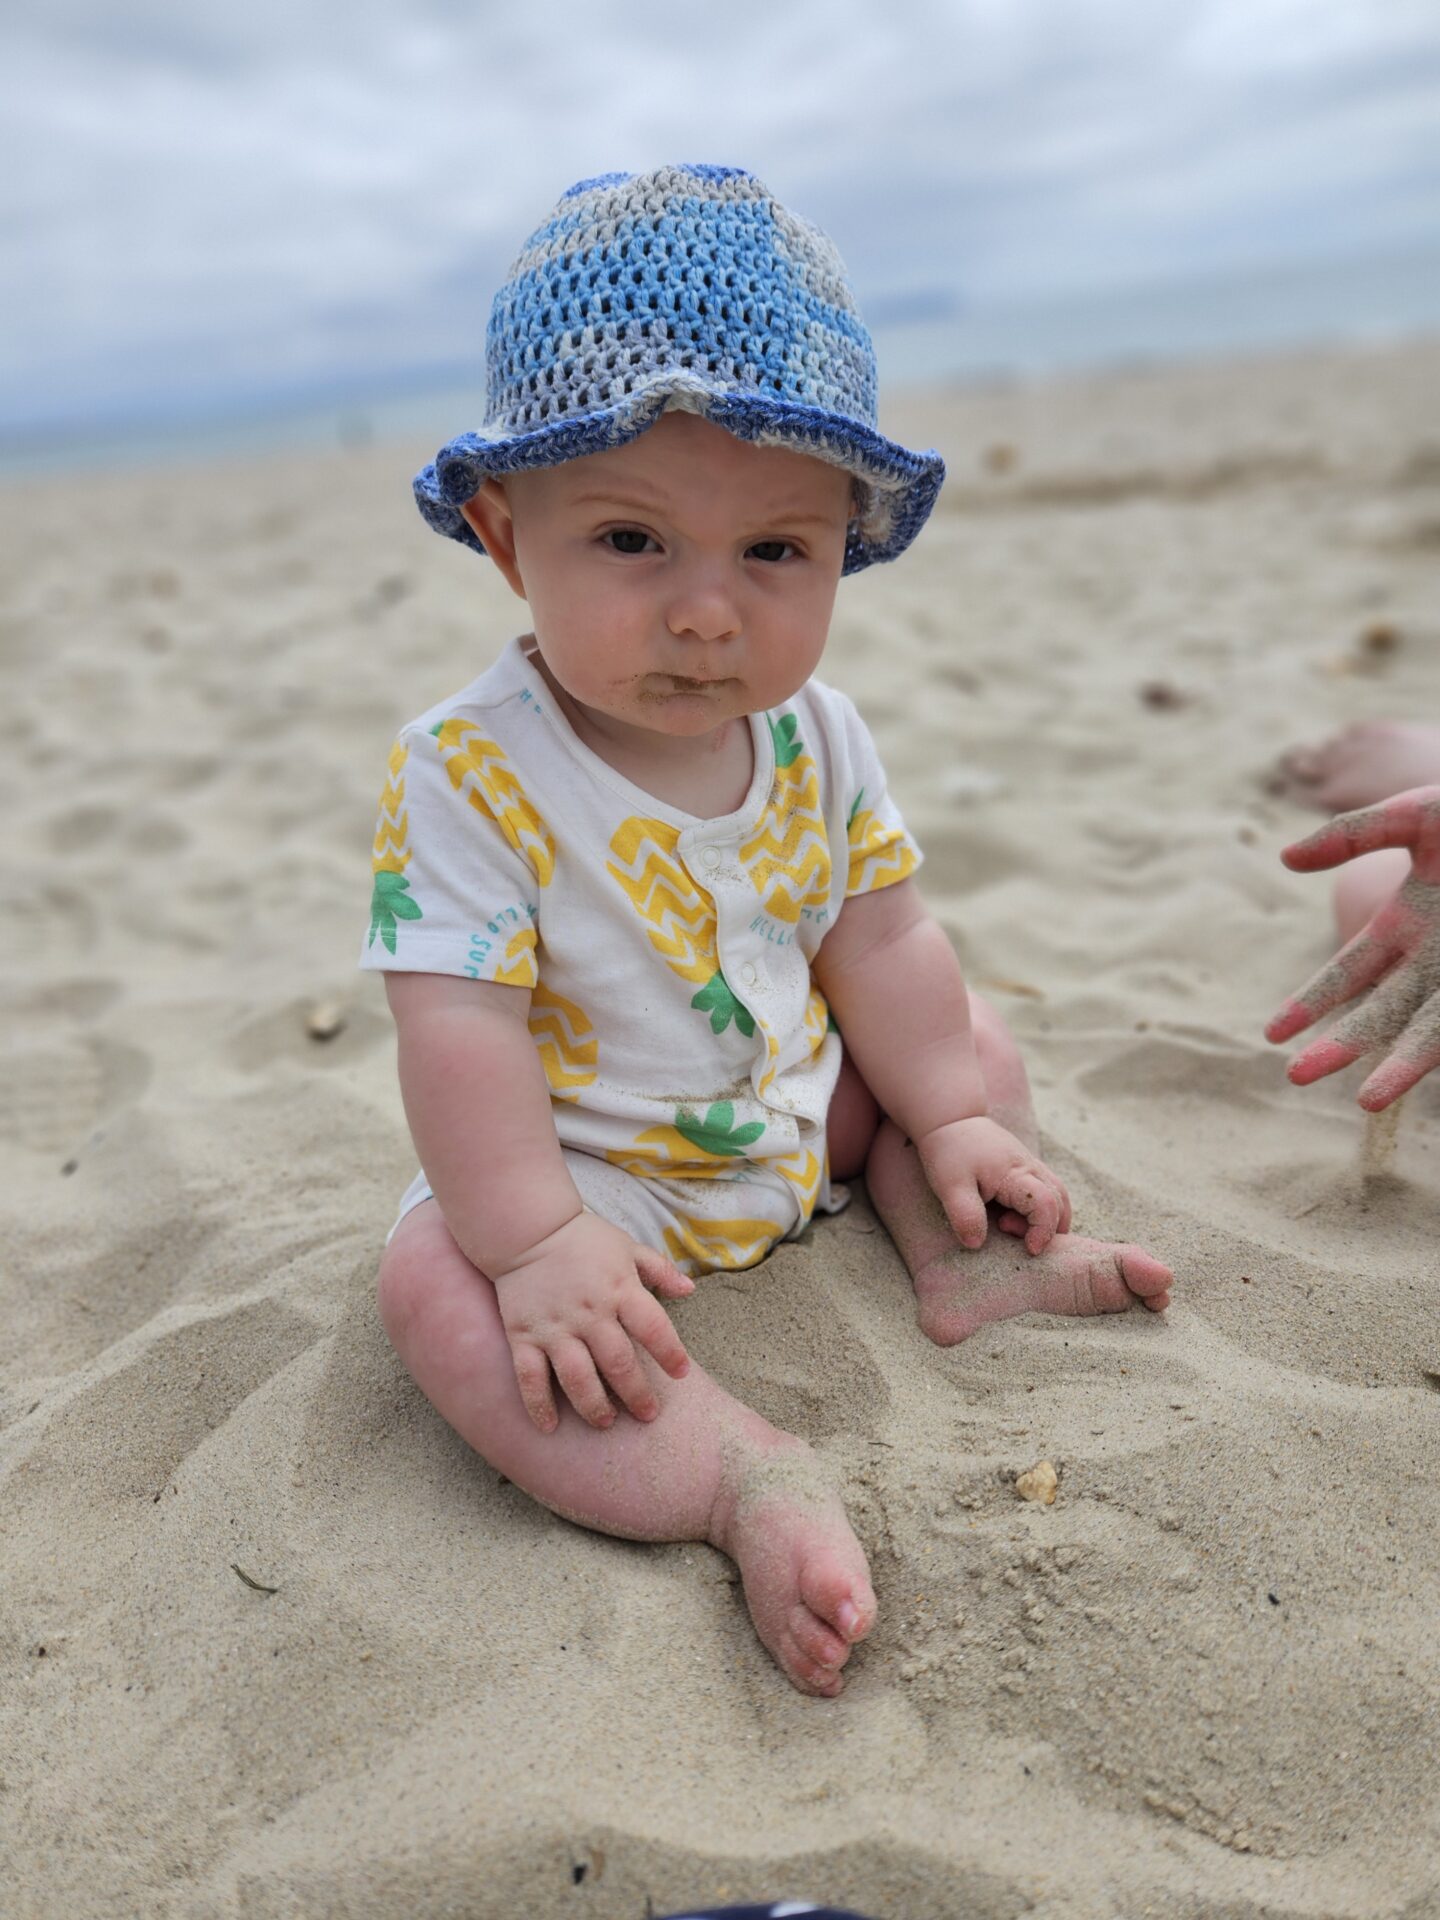 A small baby in white romper and blue crochet hat sits on a sandy beach